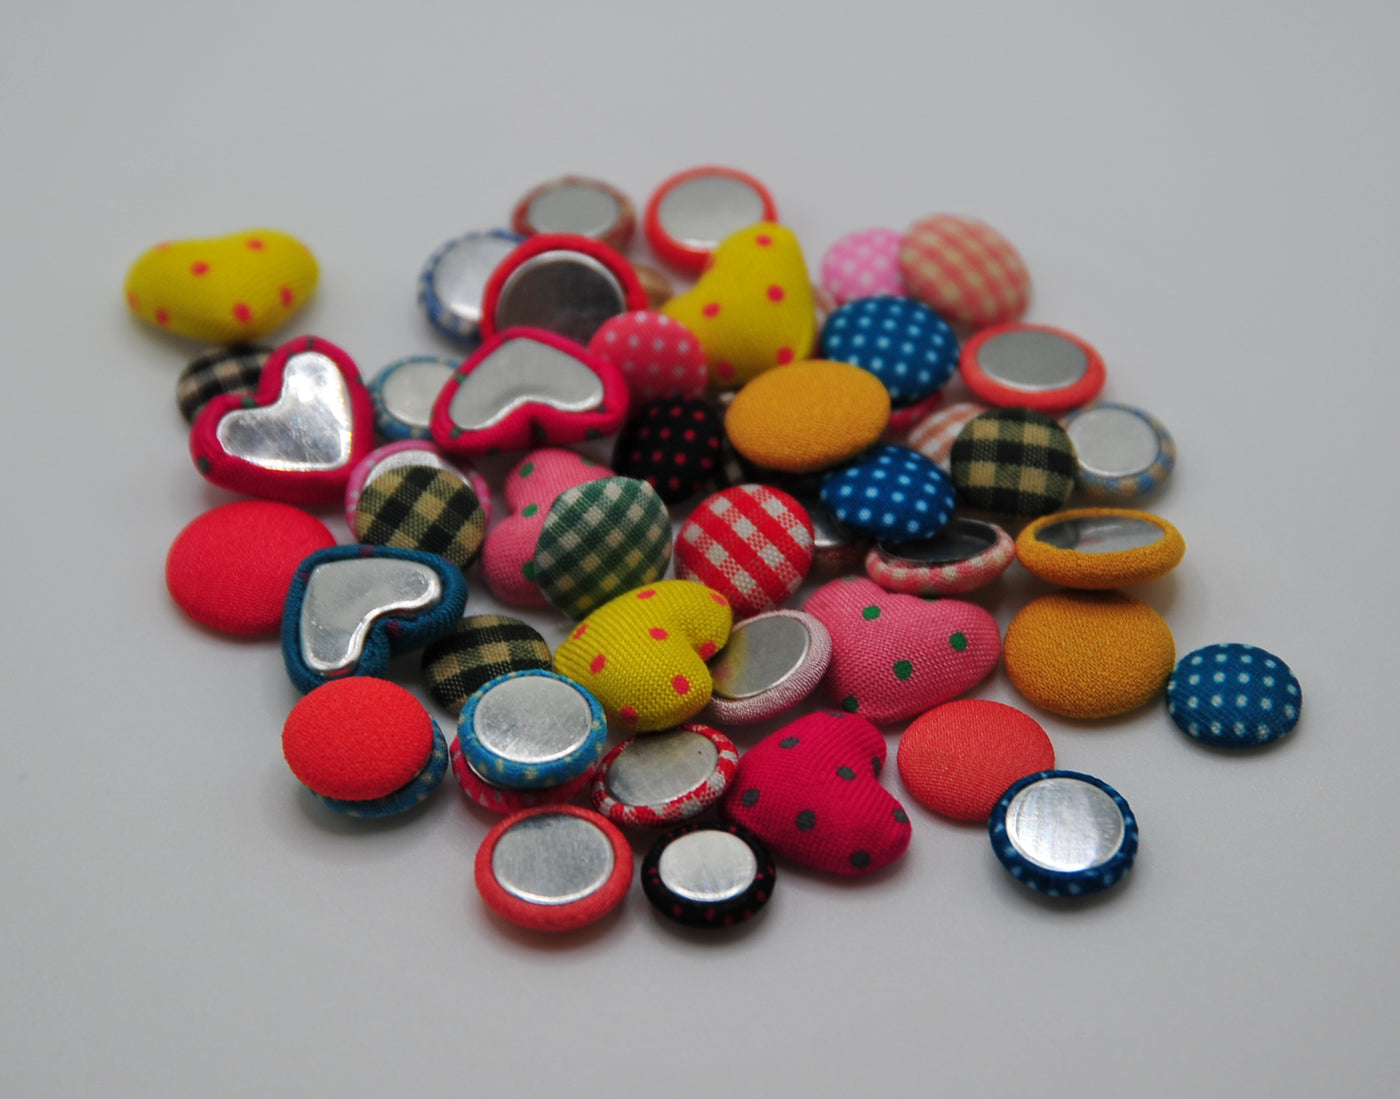 Fabric Covered Button/Cabochons - Flat backed